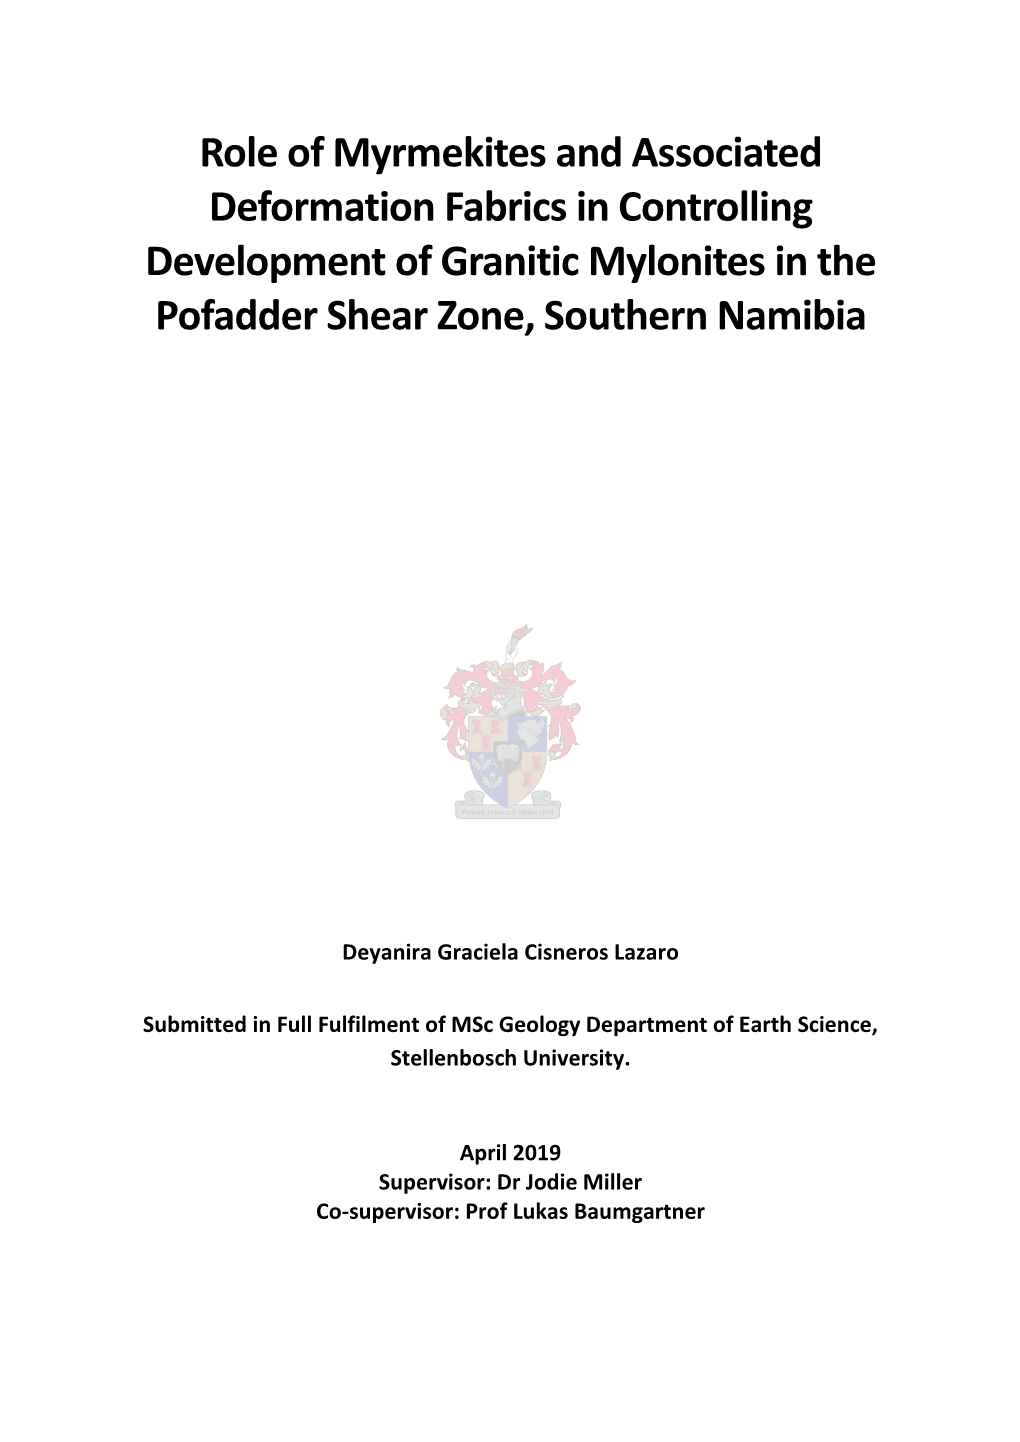 Role of Myrmekites and Associated Deformation Fabrics in Controlling Development of Granitic Mylonites in the Pofadder Shear Zone, Southern Namibia